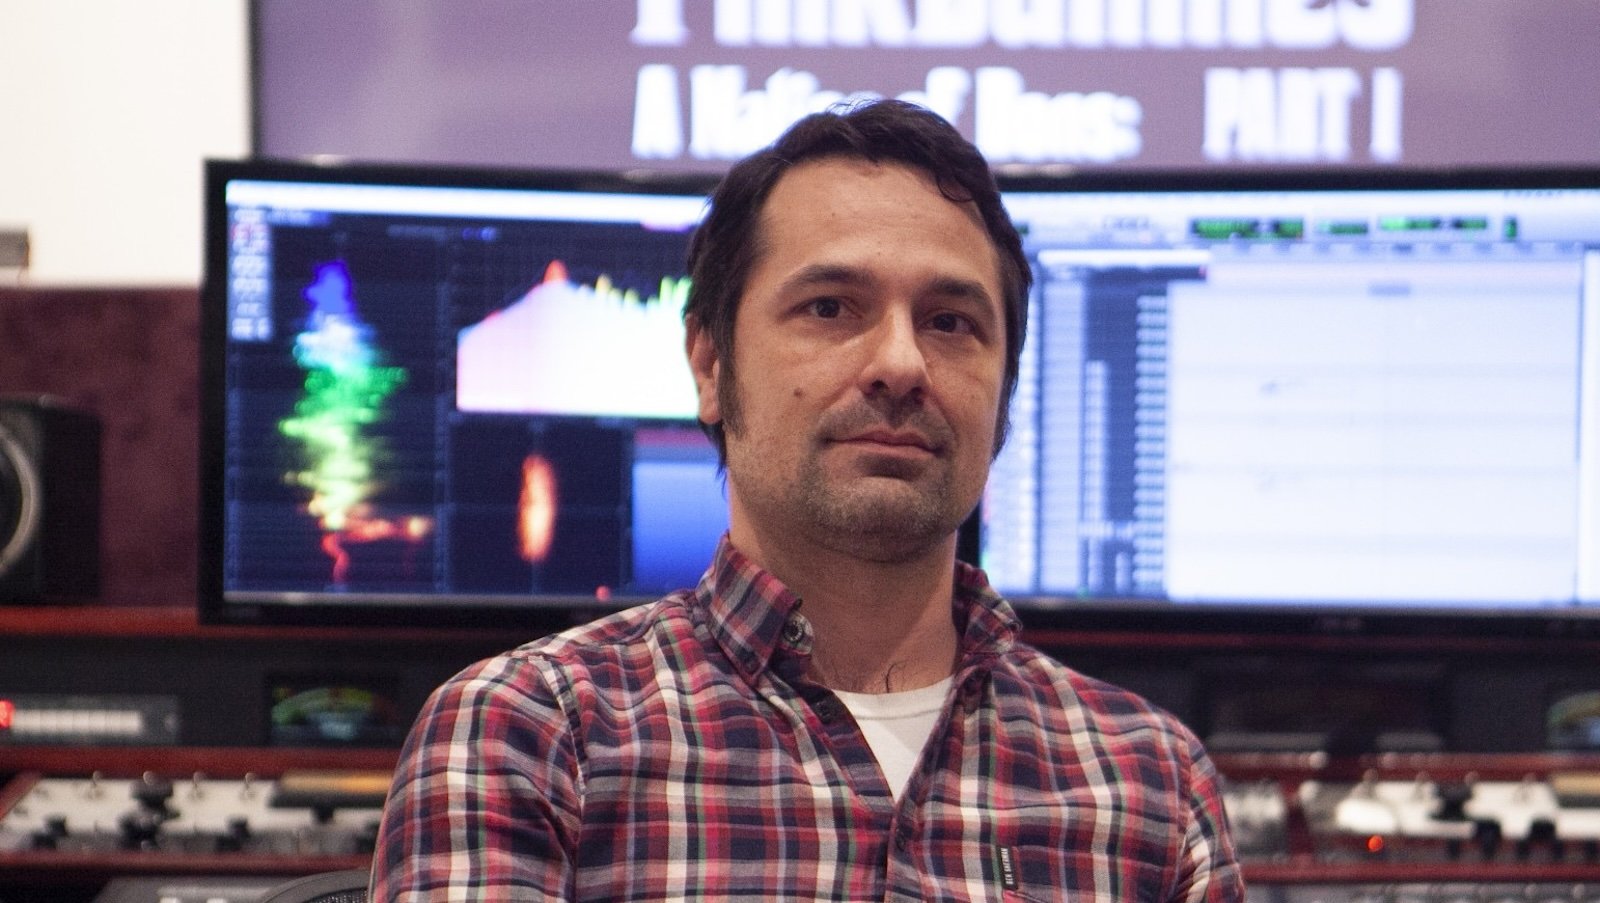 A dark-haired man wearing flannel shirt and a serious expression looks directly at us while sitting in front of two large computer monitors displaying film editing software